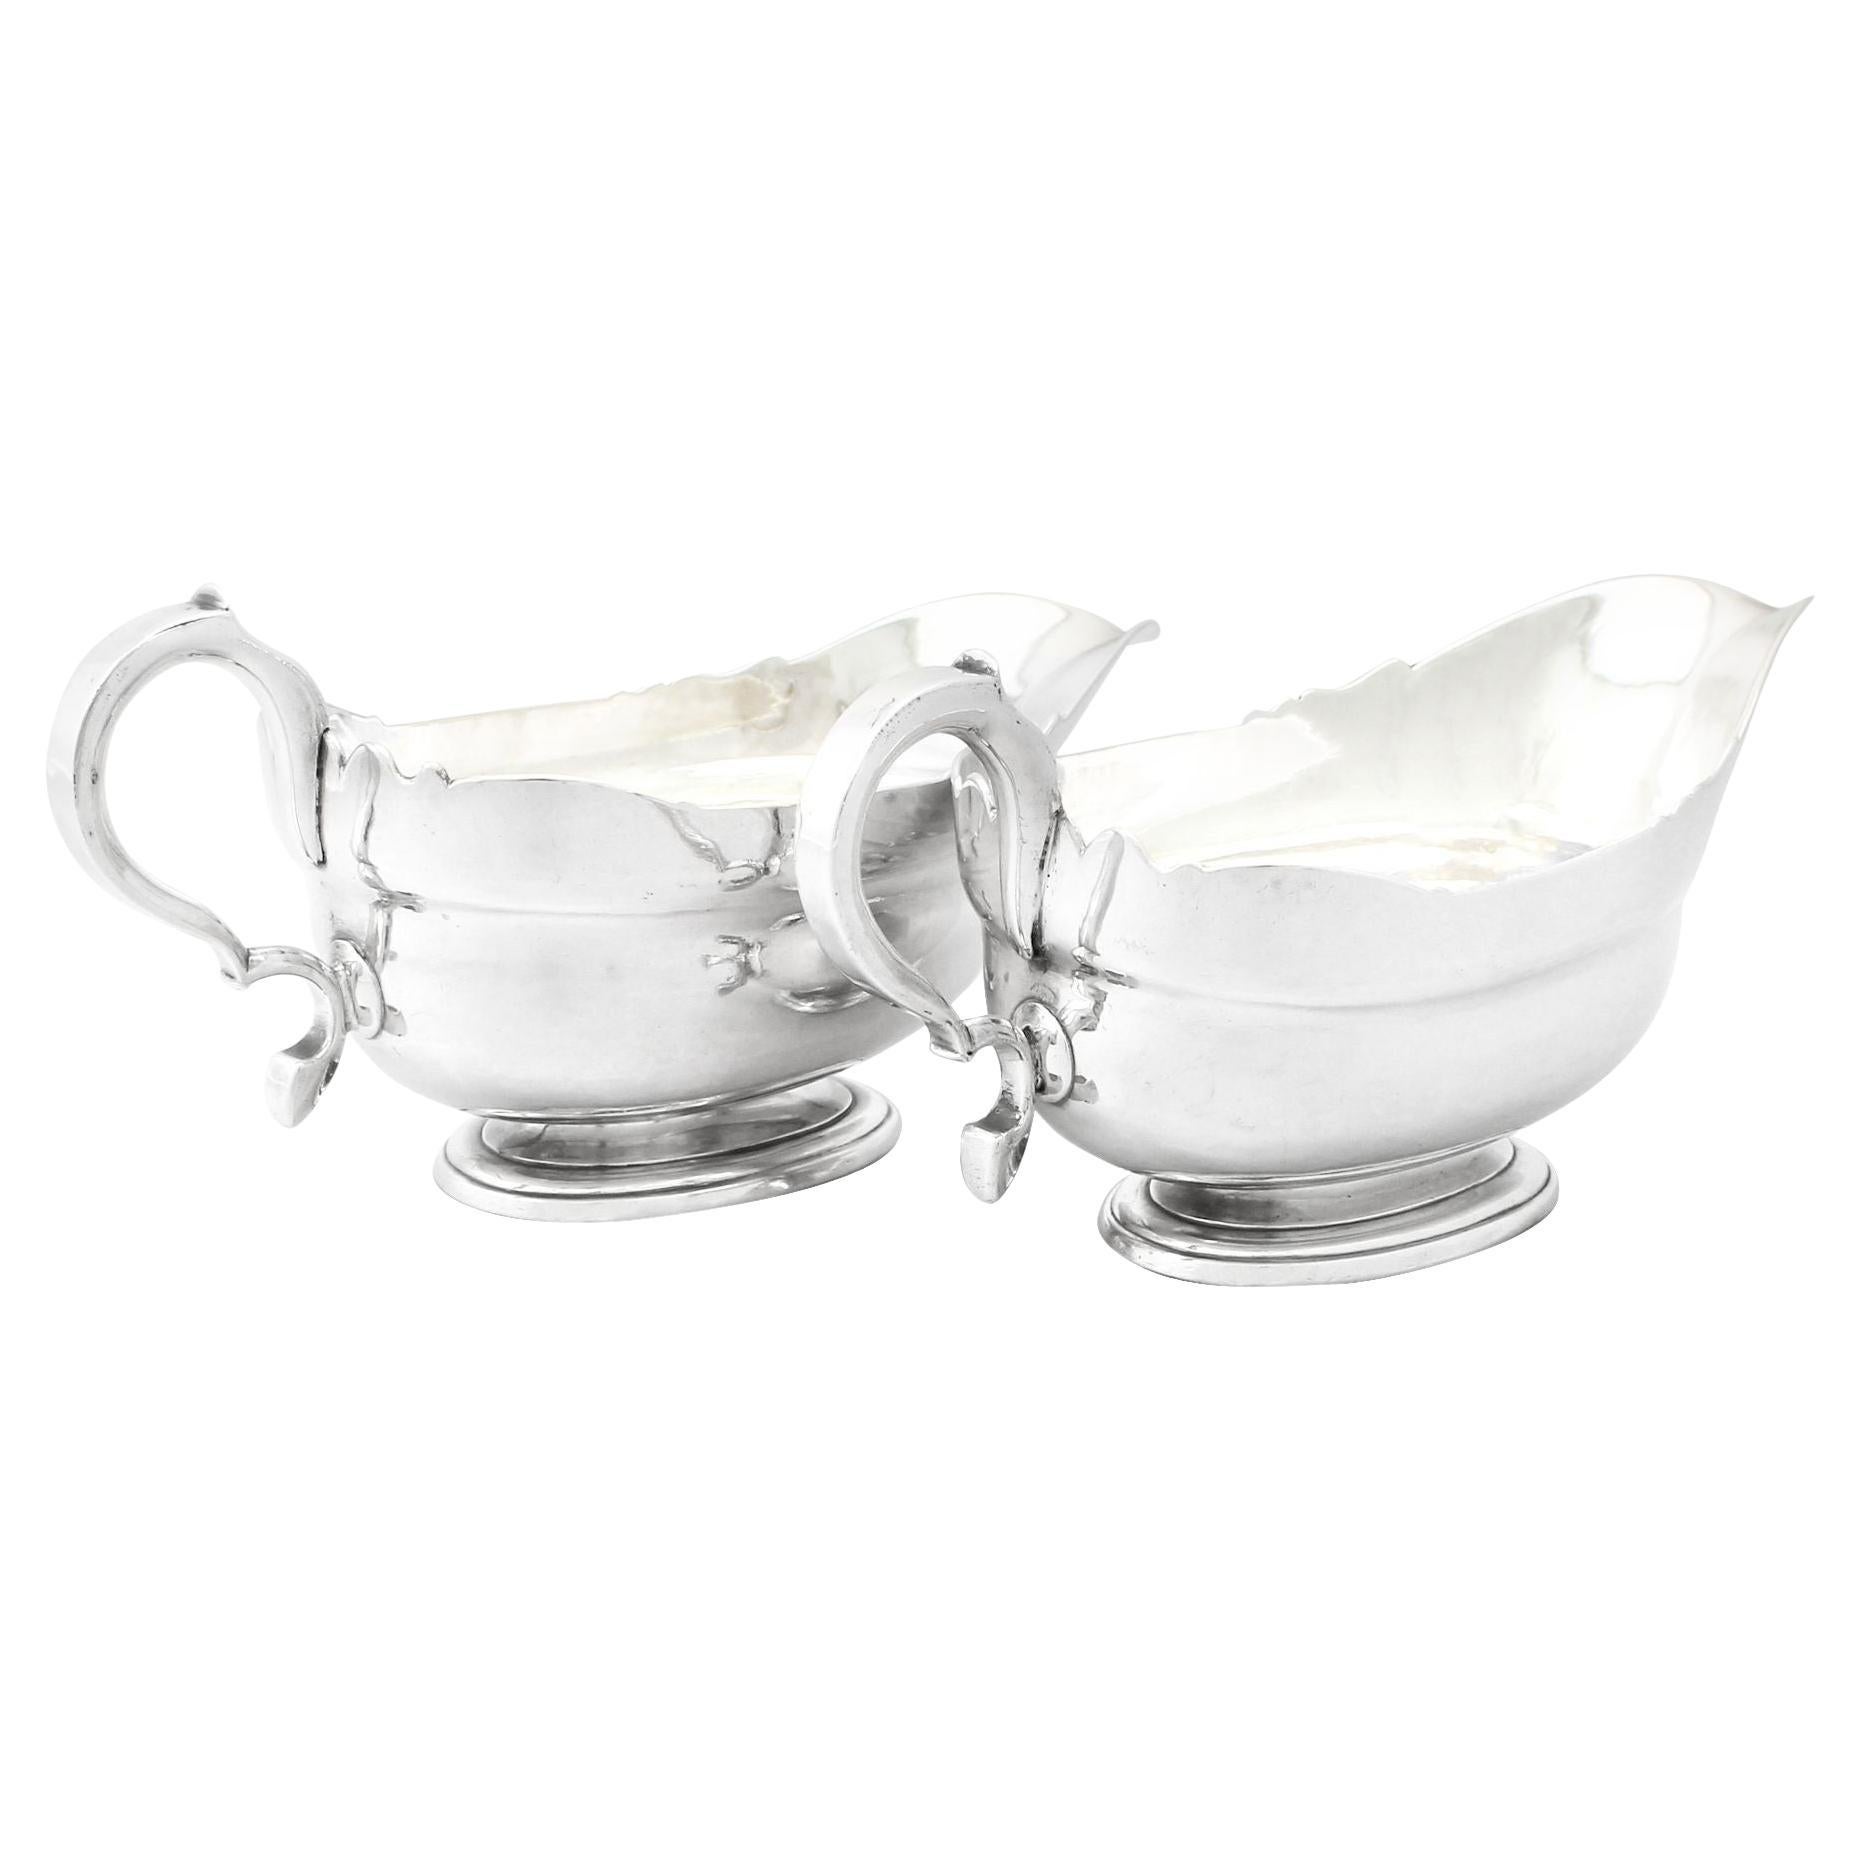 Antique Newcastle Sterling Silver Sauceboats / Gravy Boats For Sale